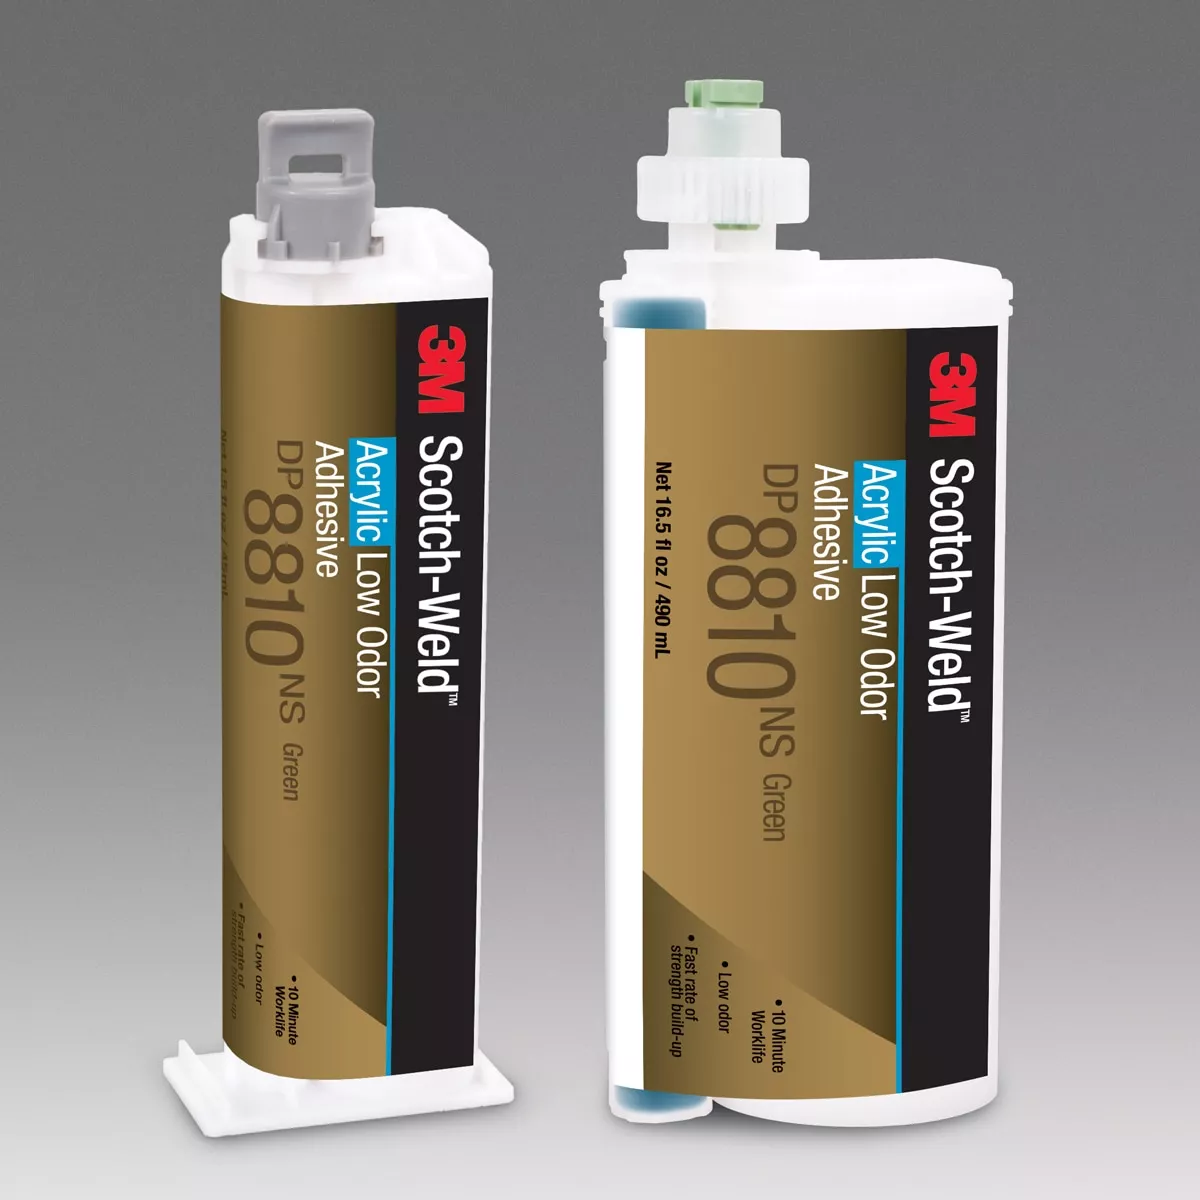 Product Number 8810NS | 3M™ Scotch-Weld™ Low Odor Acrylic Adhesive 8810NS